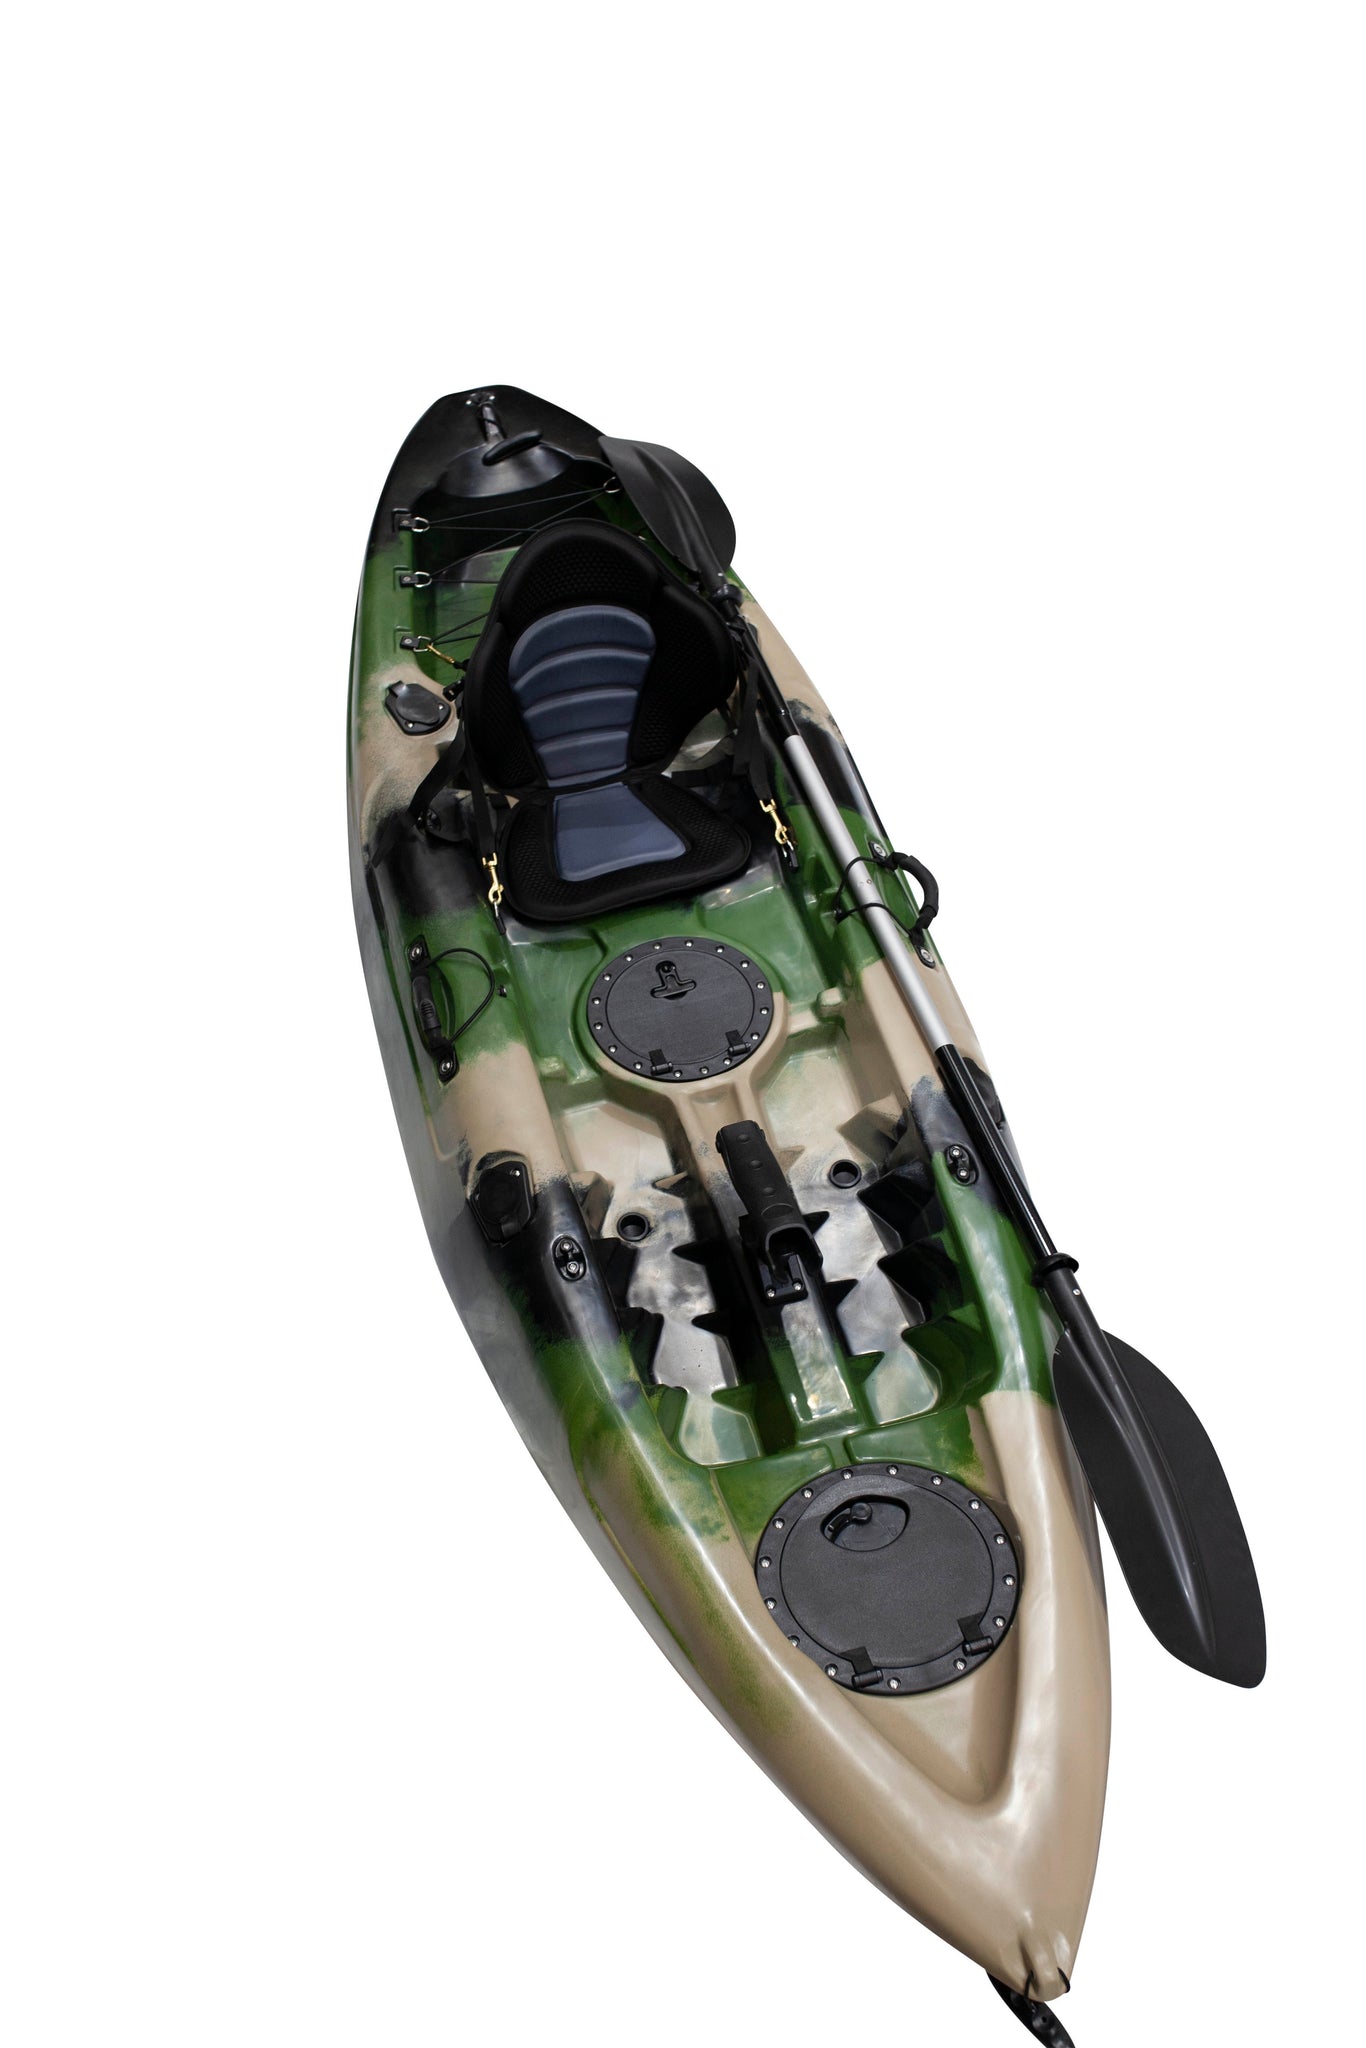 Best Single Person Inflatable Kayak, Fishing Kayak for Sale Sydney